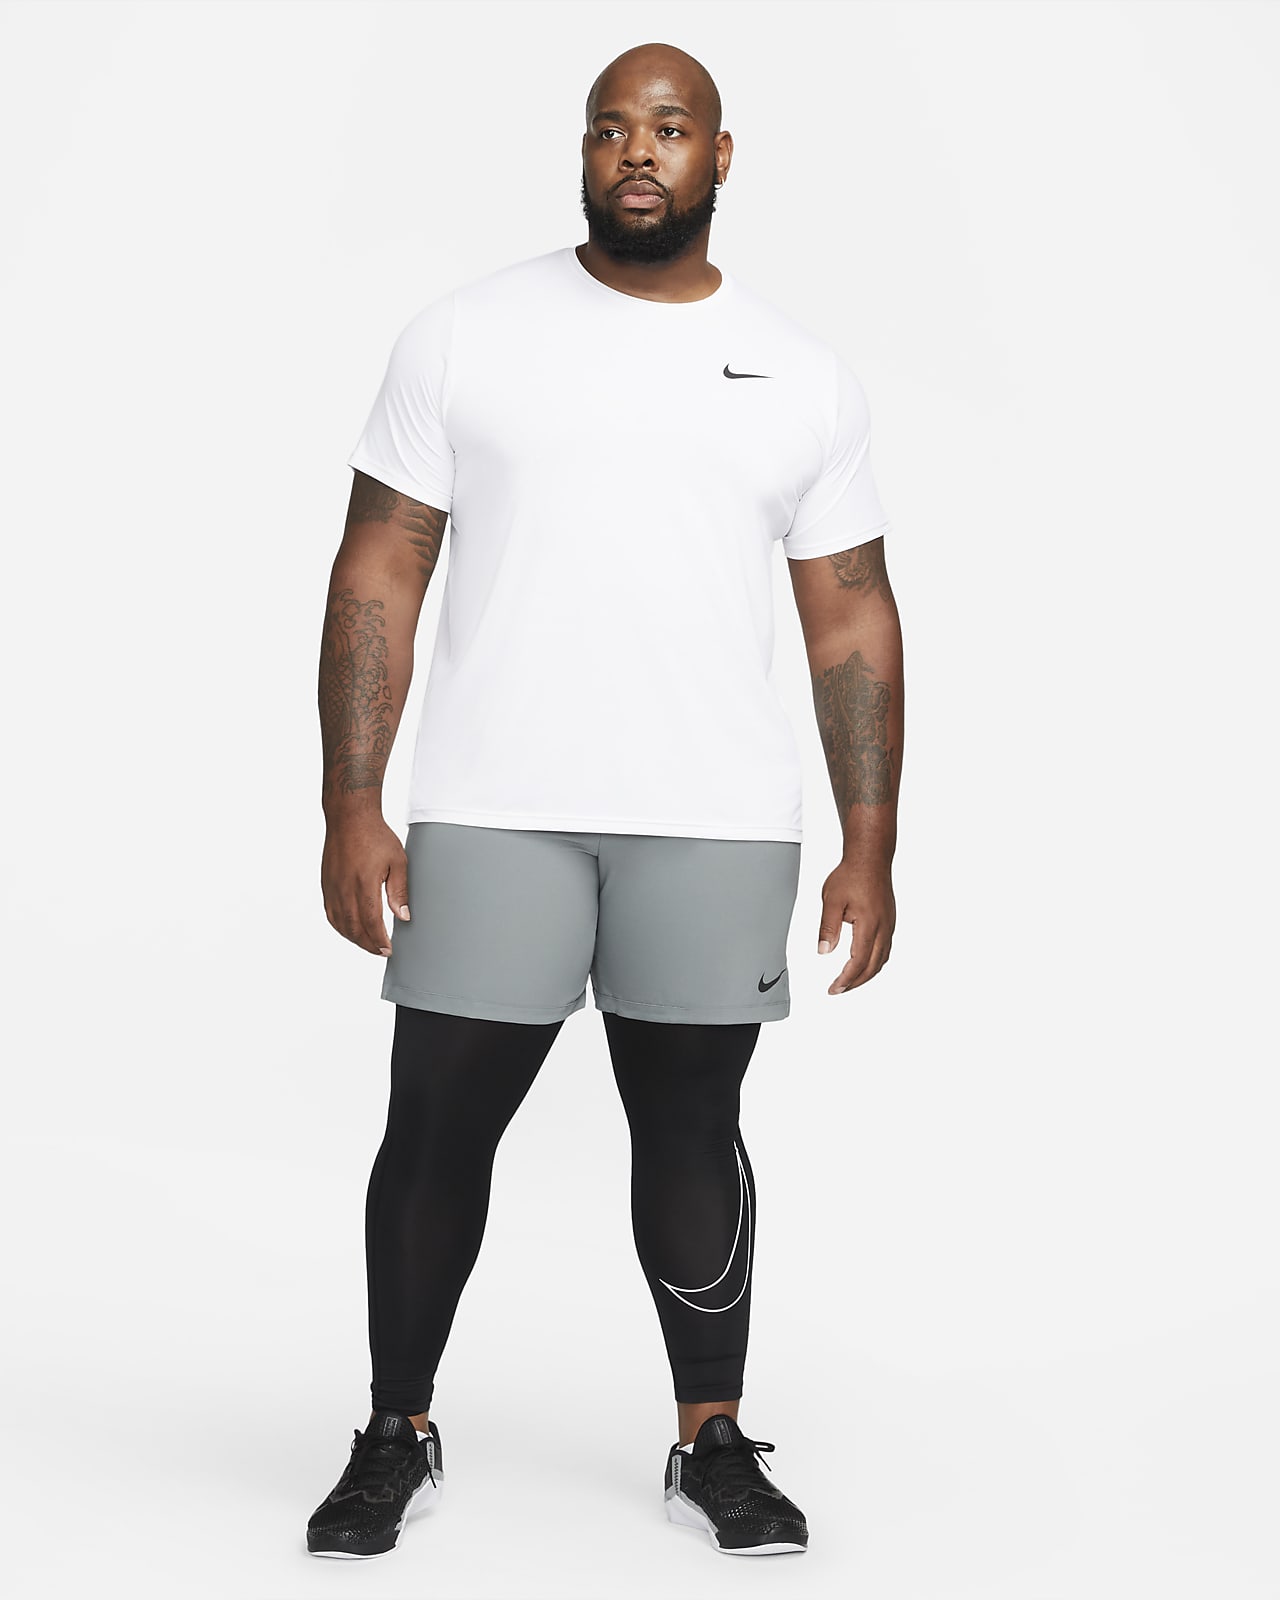 Nike Black Pro Hyper Recovery Compression Tights 812988-010 Men's Size 2XL  $150